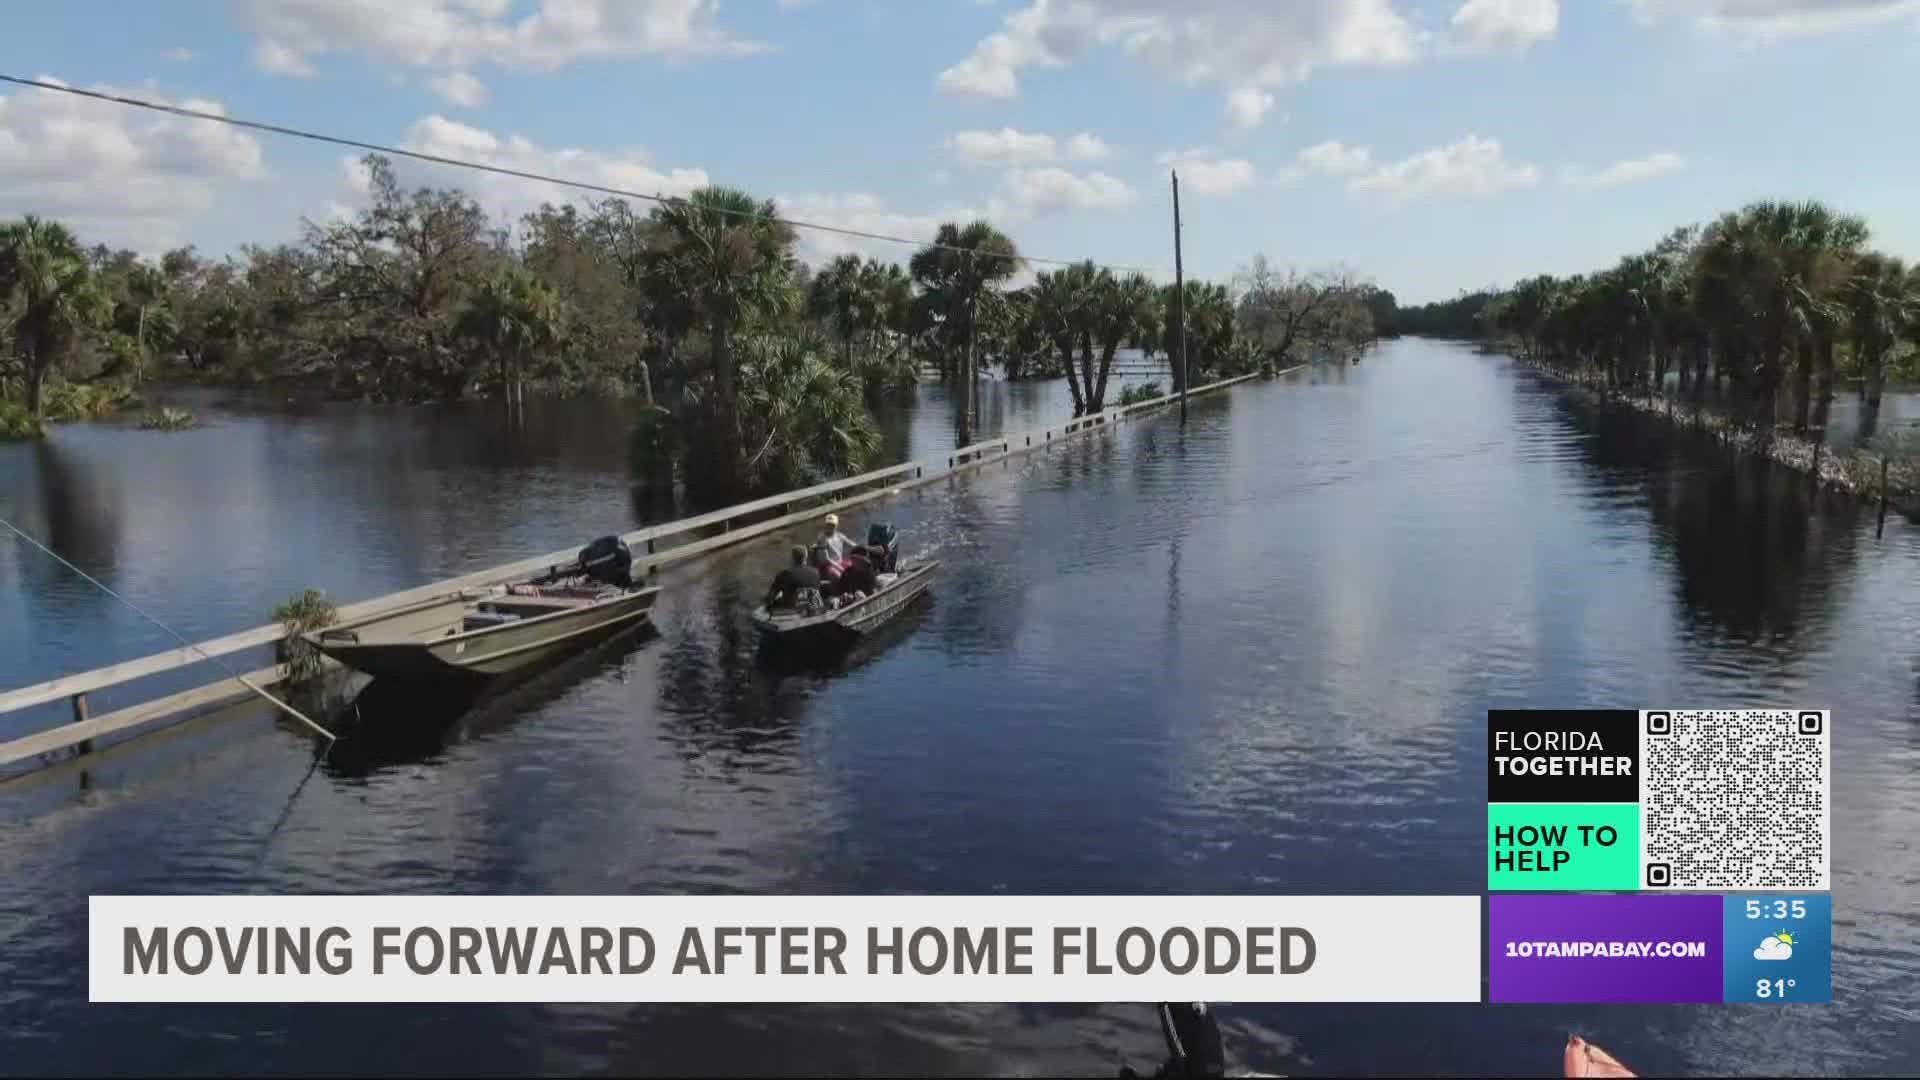 One neighbor in Venice said since living in the area for 17 years, he's never seen flooding like this.